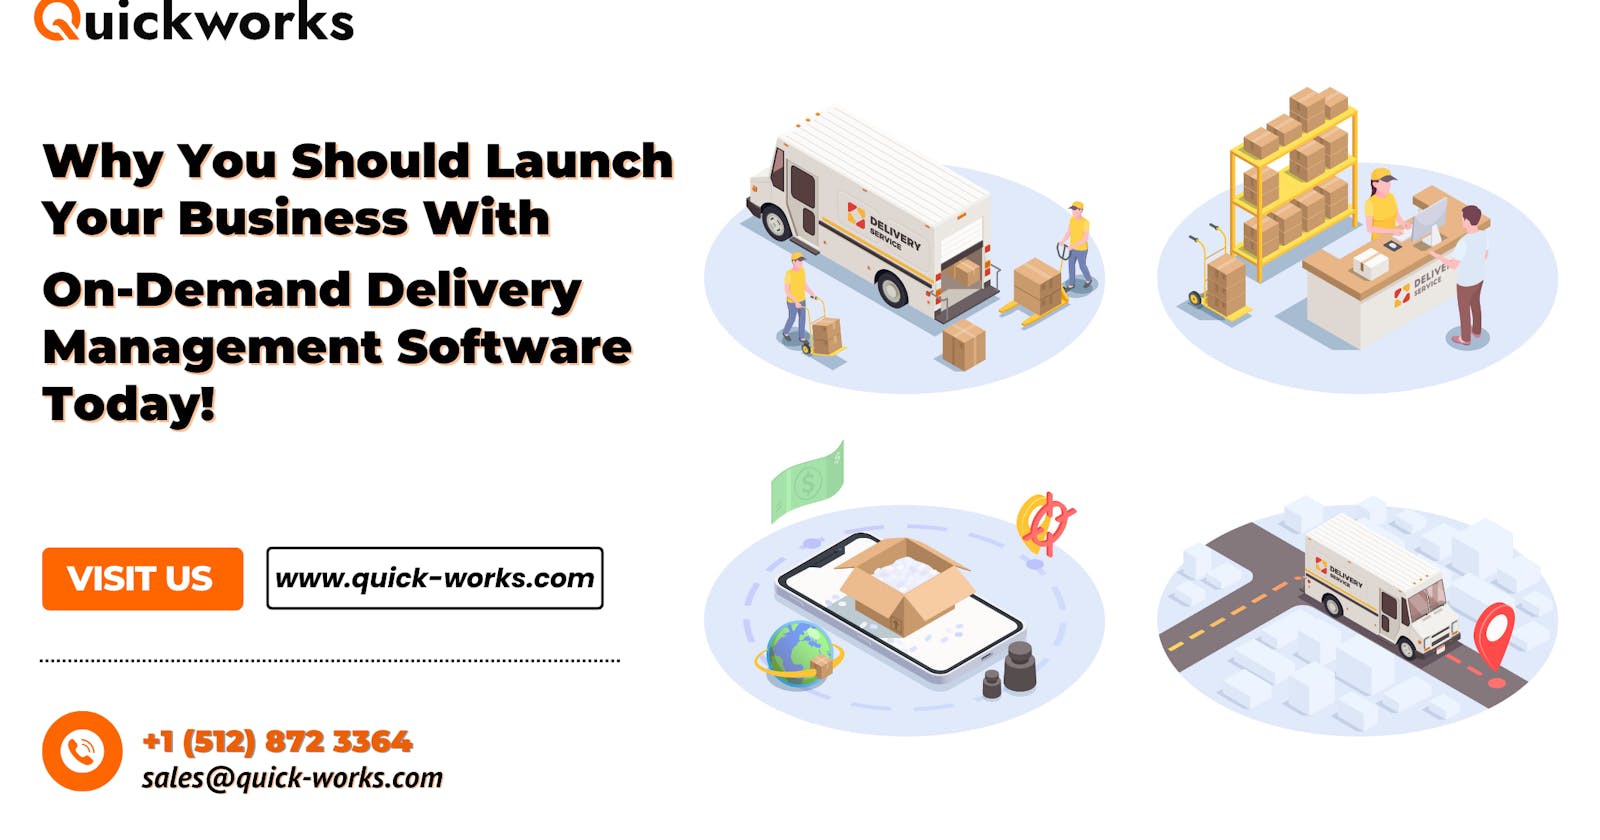 Why You Should Launch Your Business With On-Demand Delivery Management Software Today!